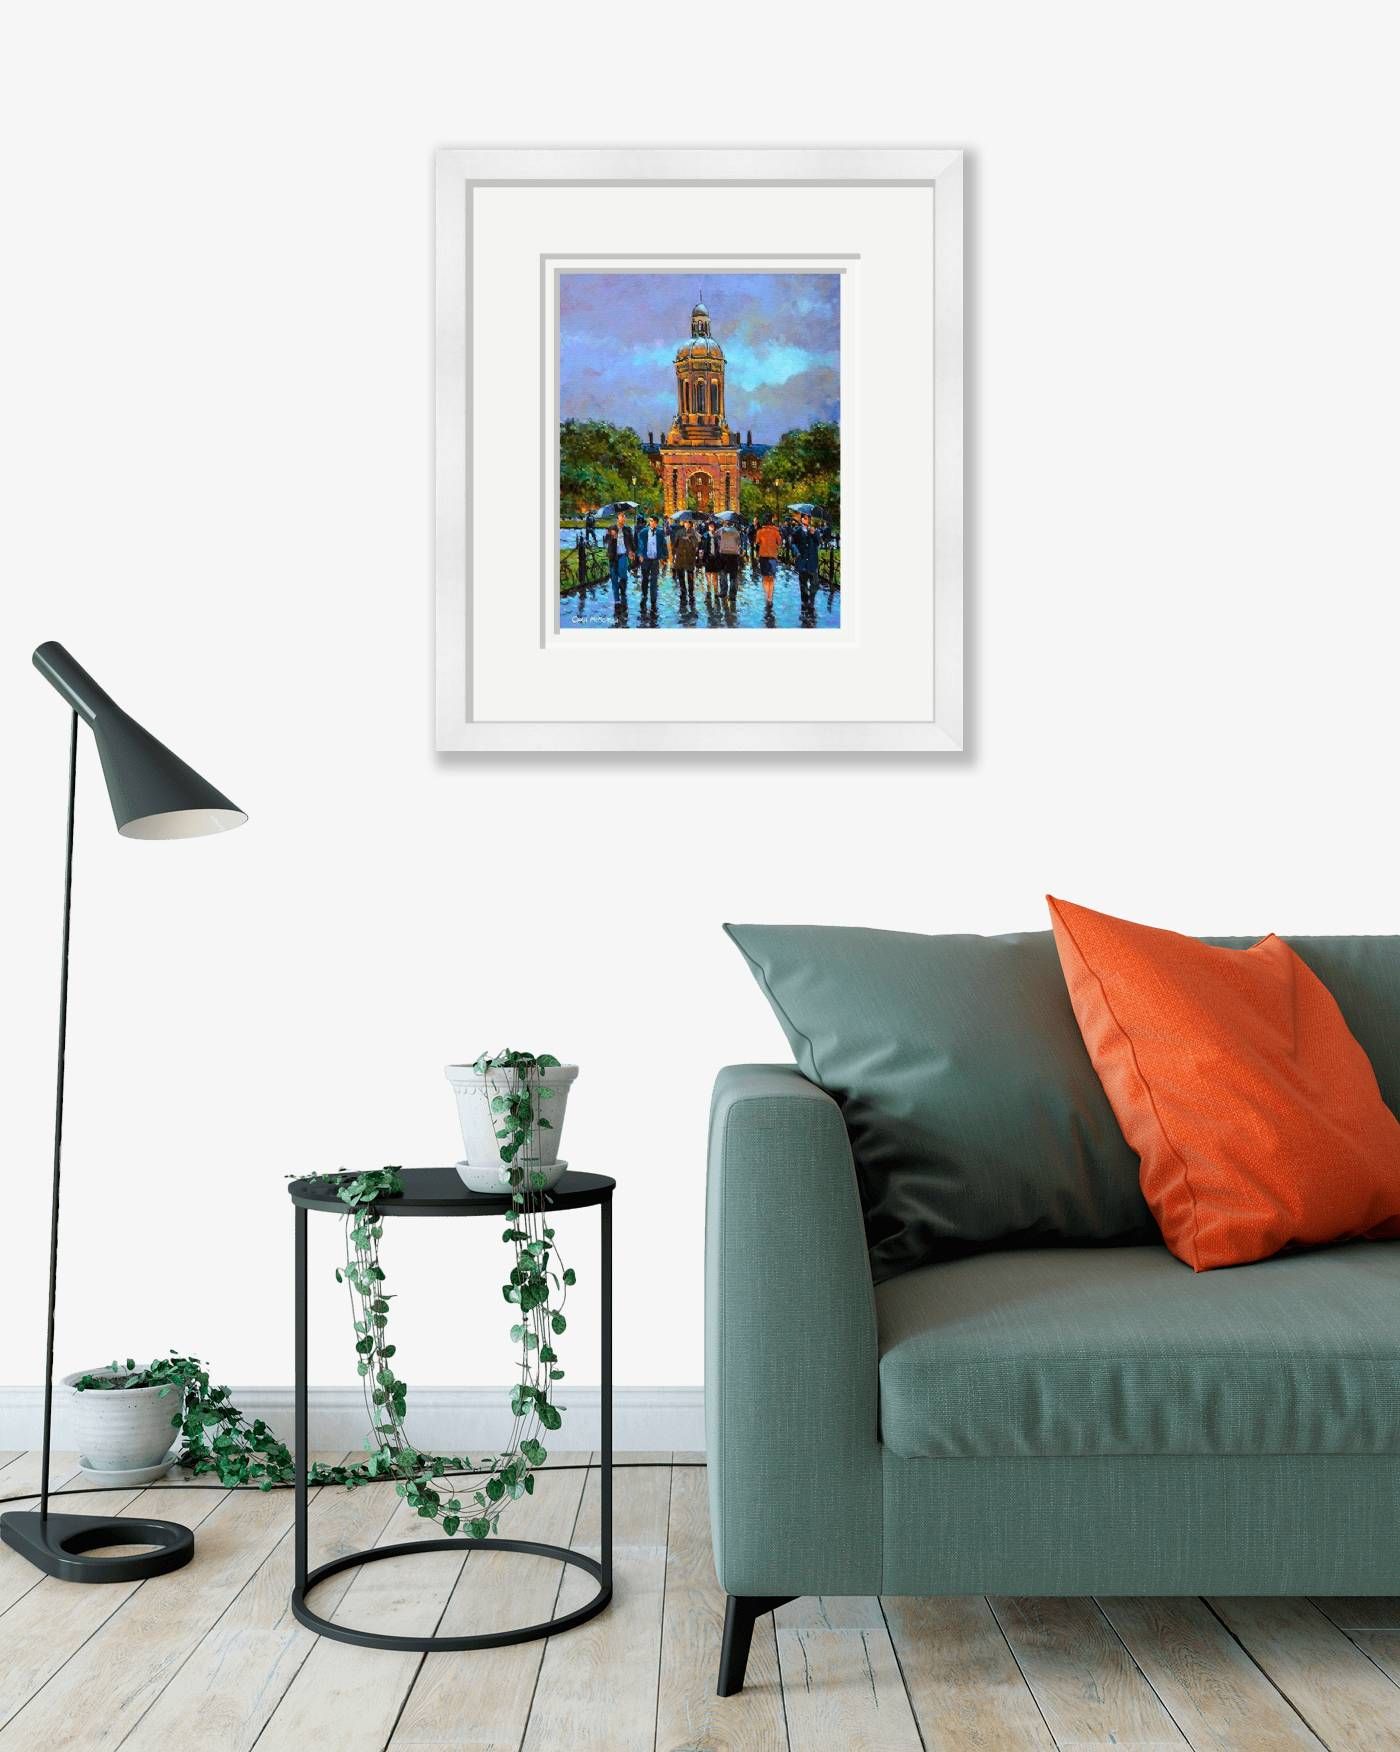 Large framed - The Campanile Trinity College - 403 by Chris McMorrow